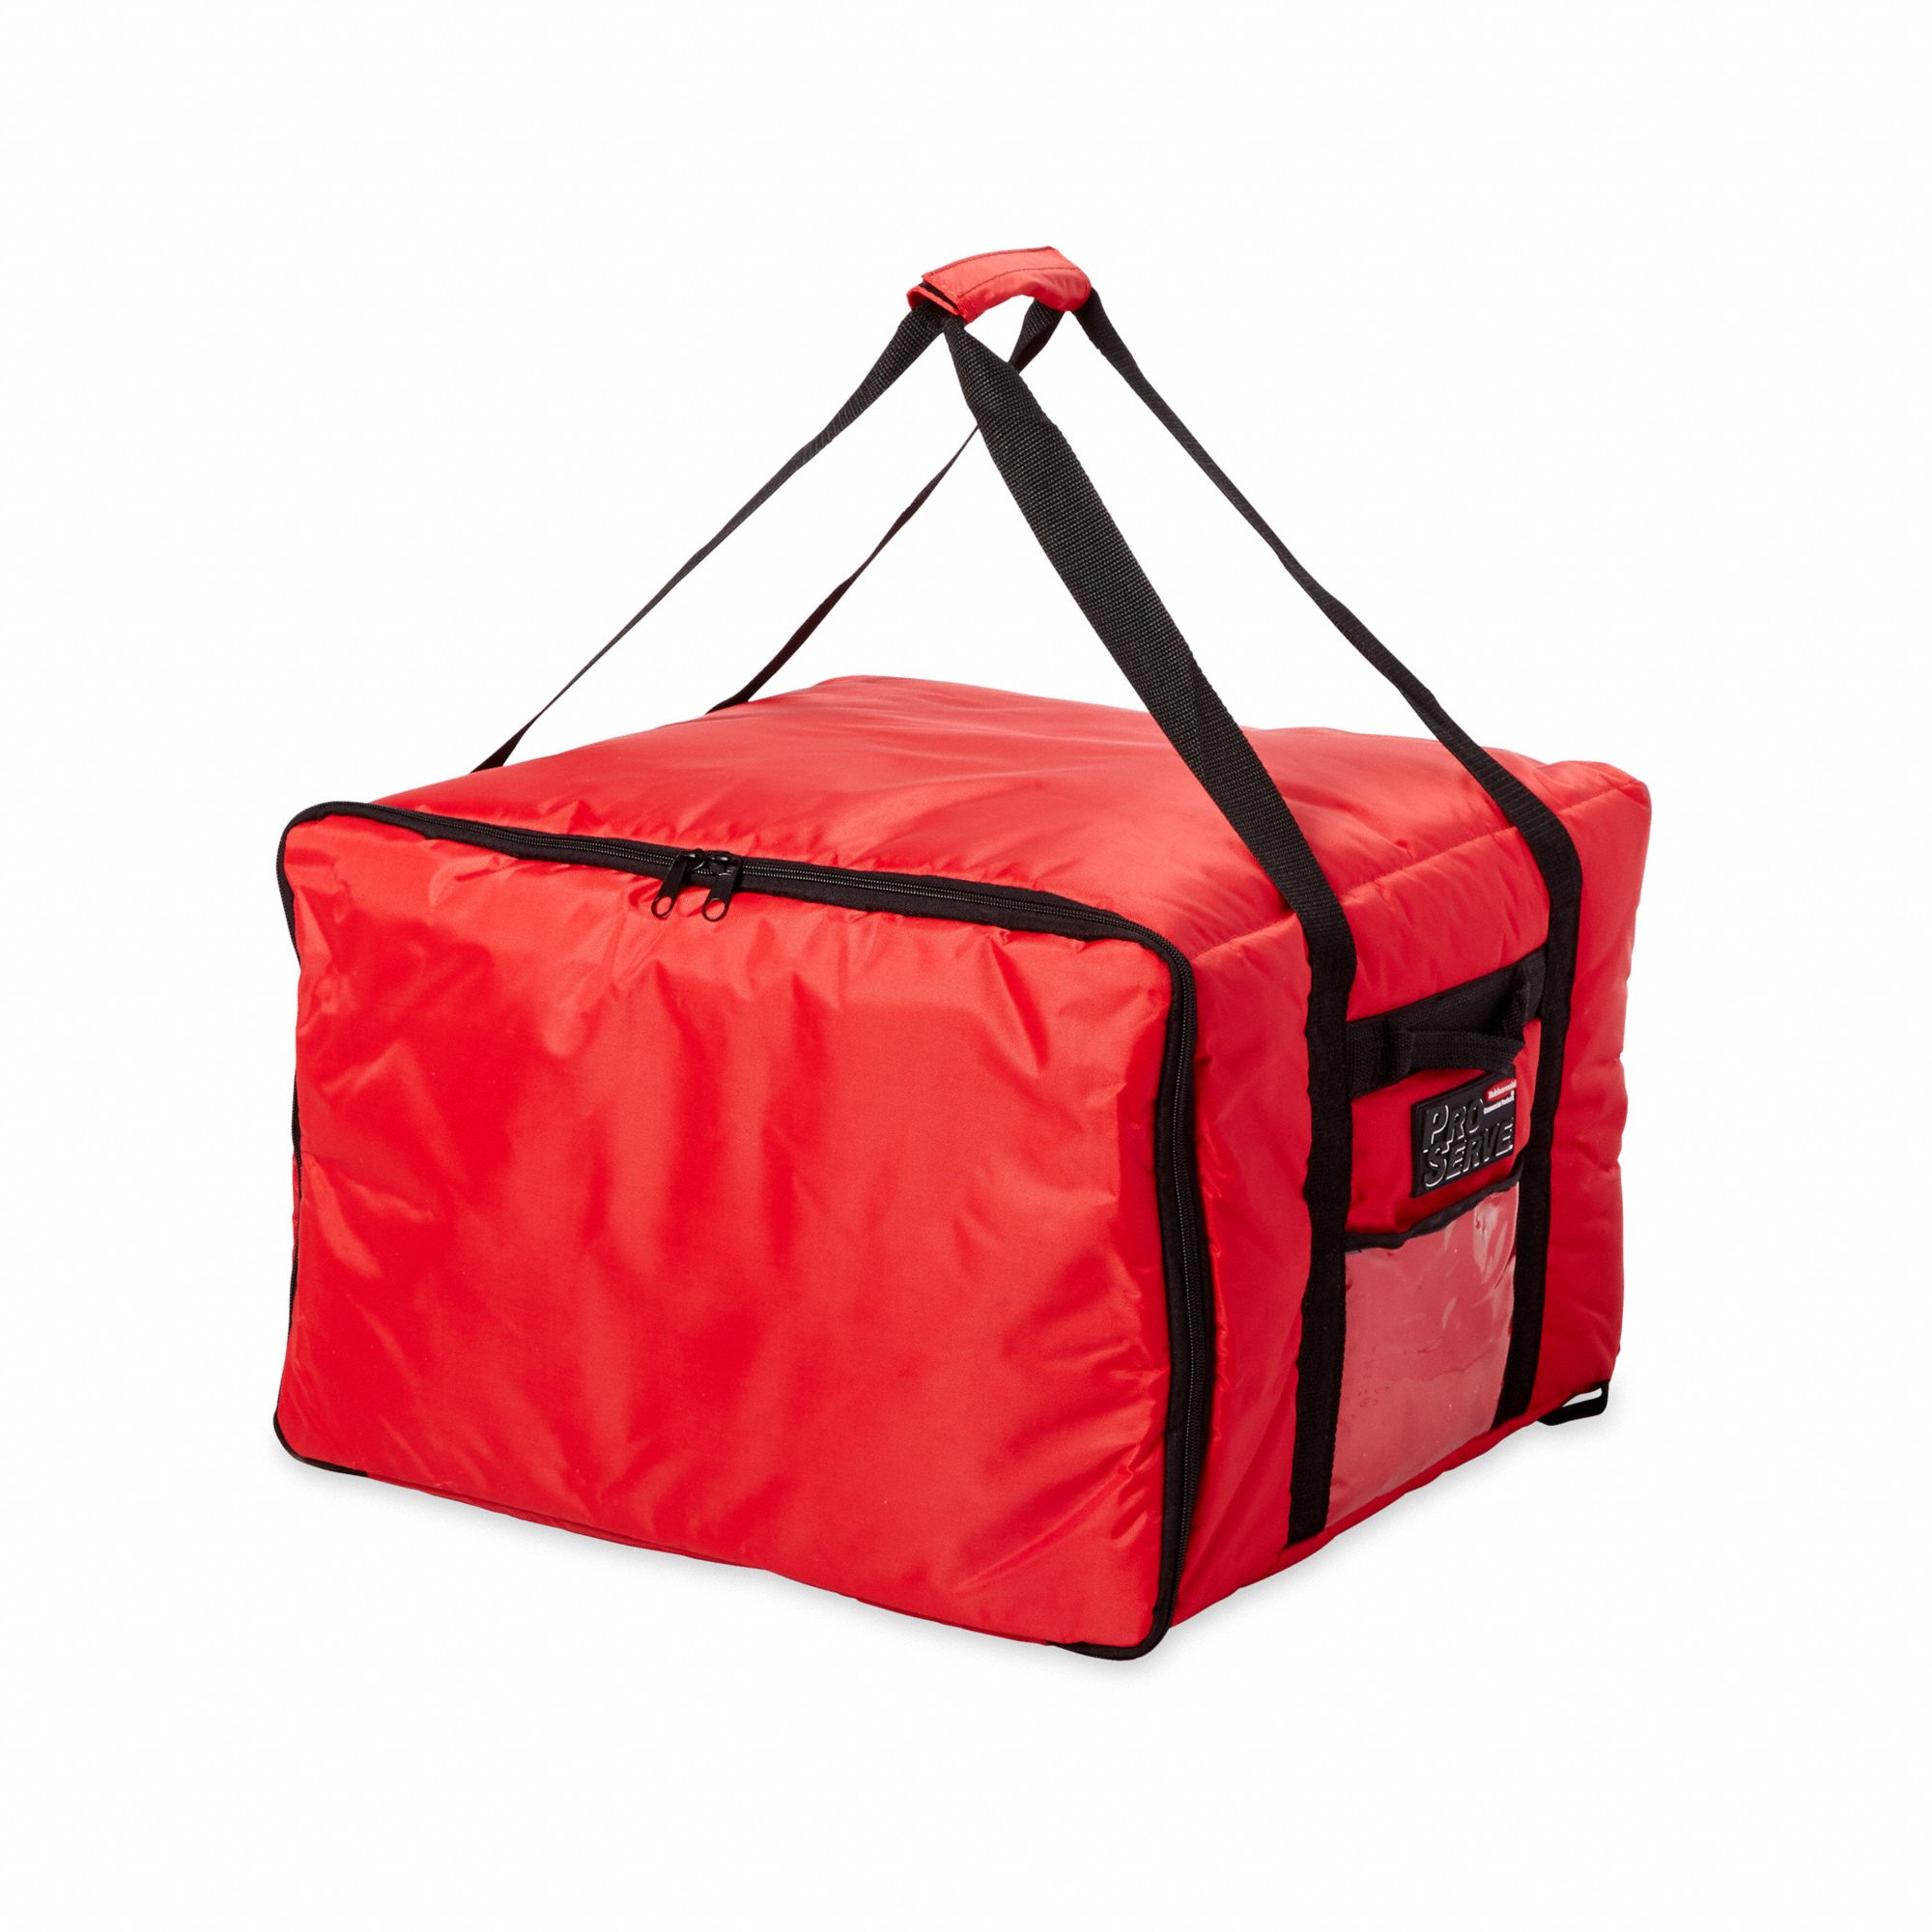 Red Rubbermaid Commercial Products PROSERVE Insulated Professional Pizza Delivery Bag Medium FG9F3600RED 